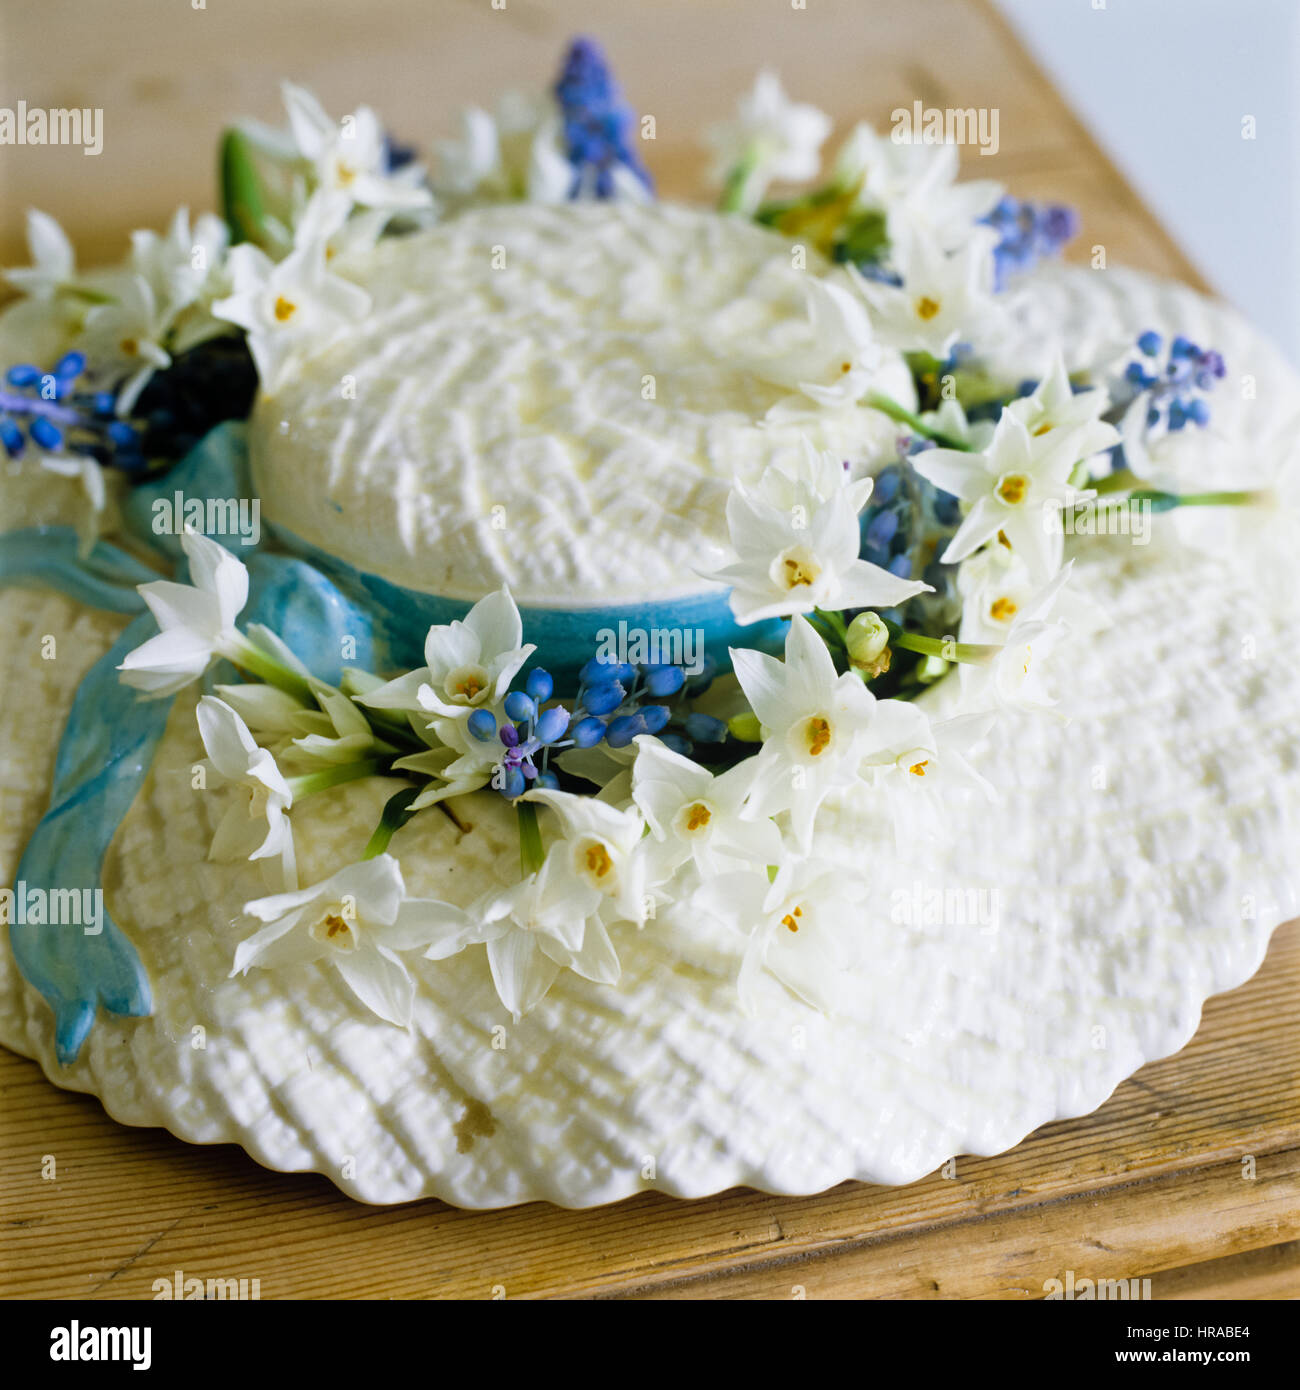 A cake in the shape of a hat with flowers. Stock Photo